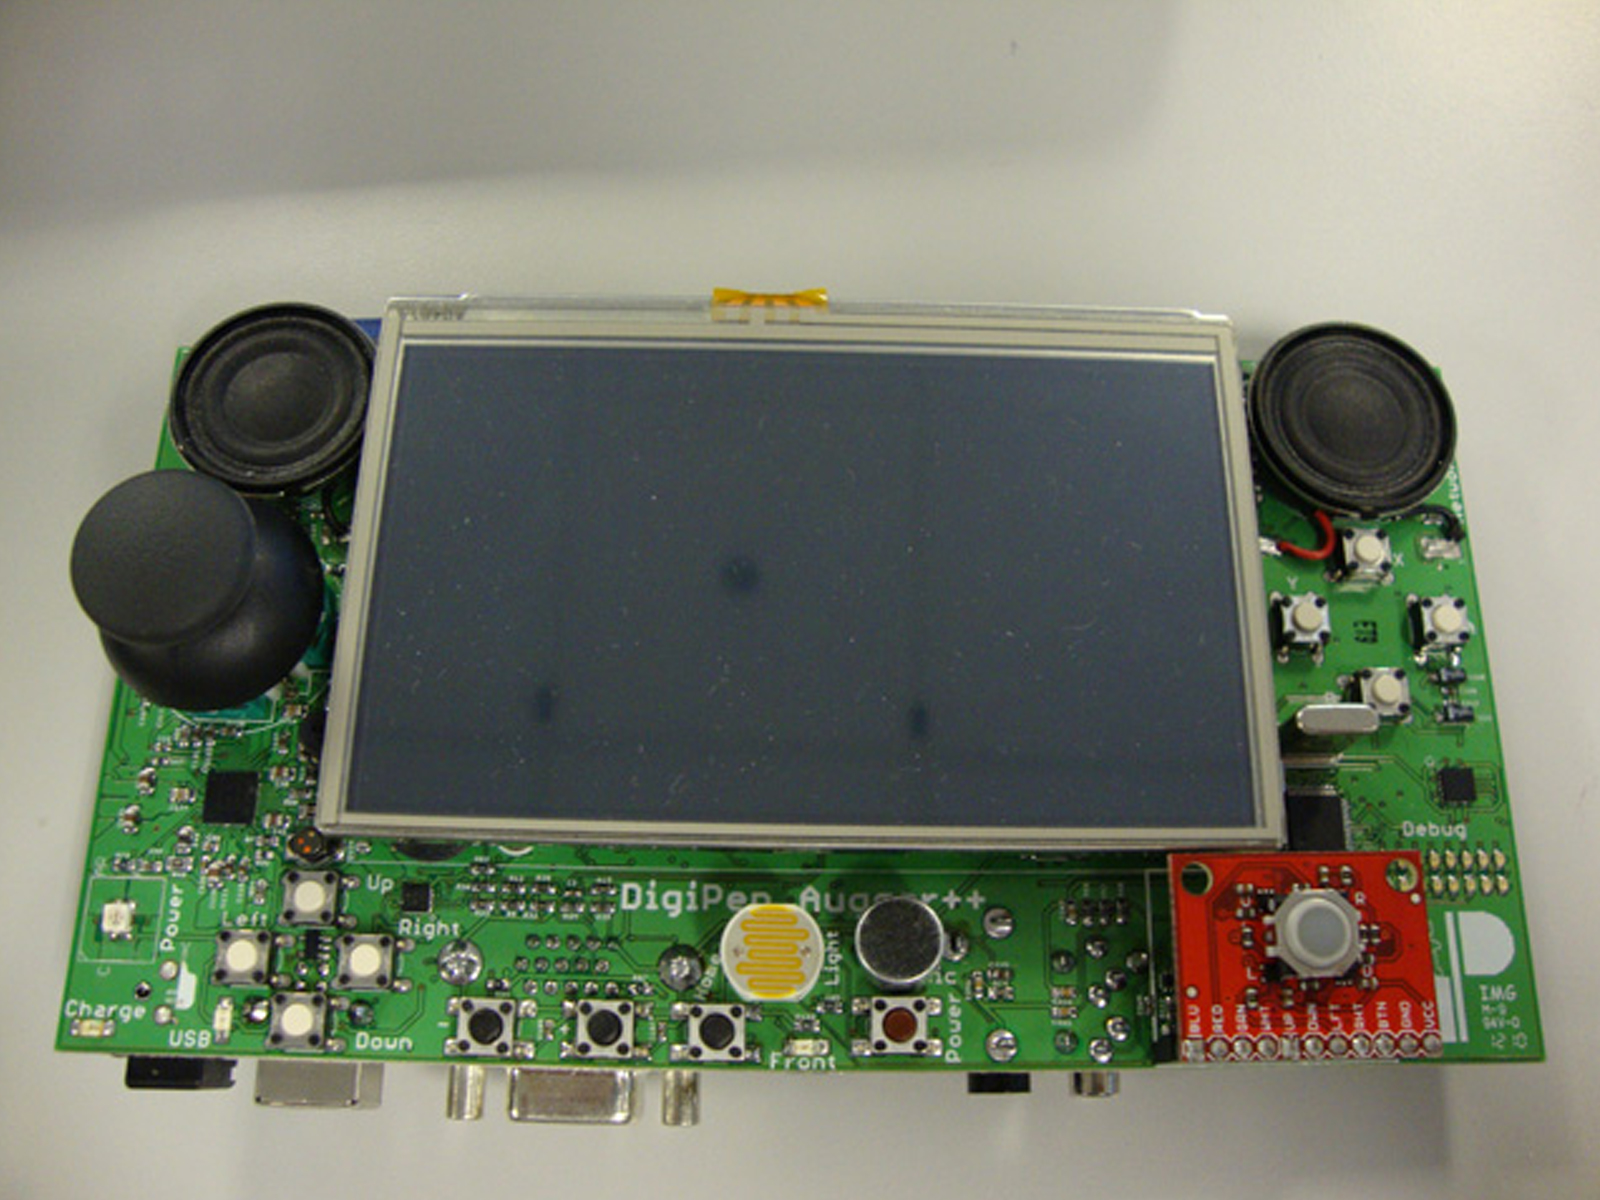 Picture of the Augger, an original handheld gaming device DigiPen alumnus Chris Clark helped design and build